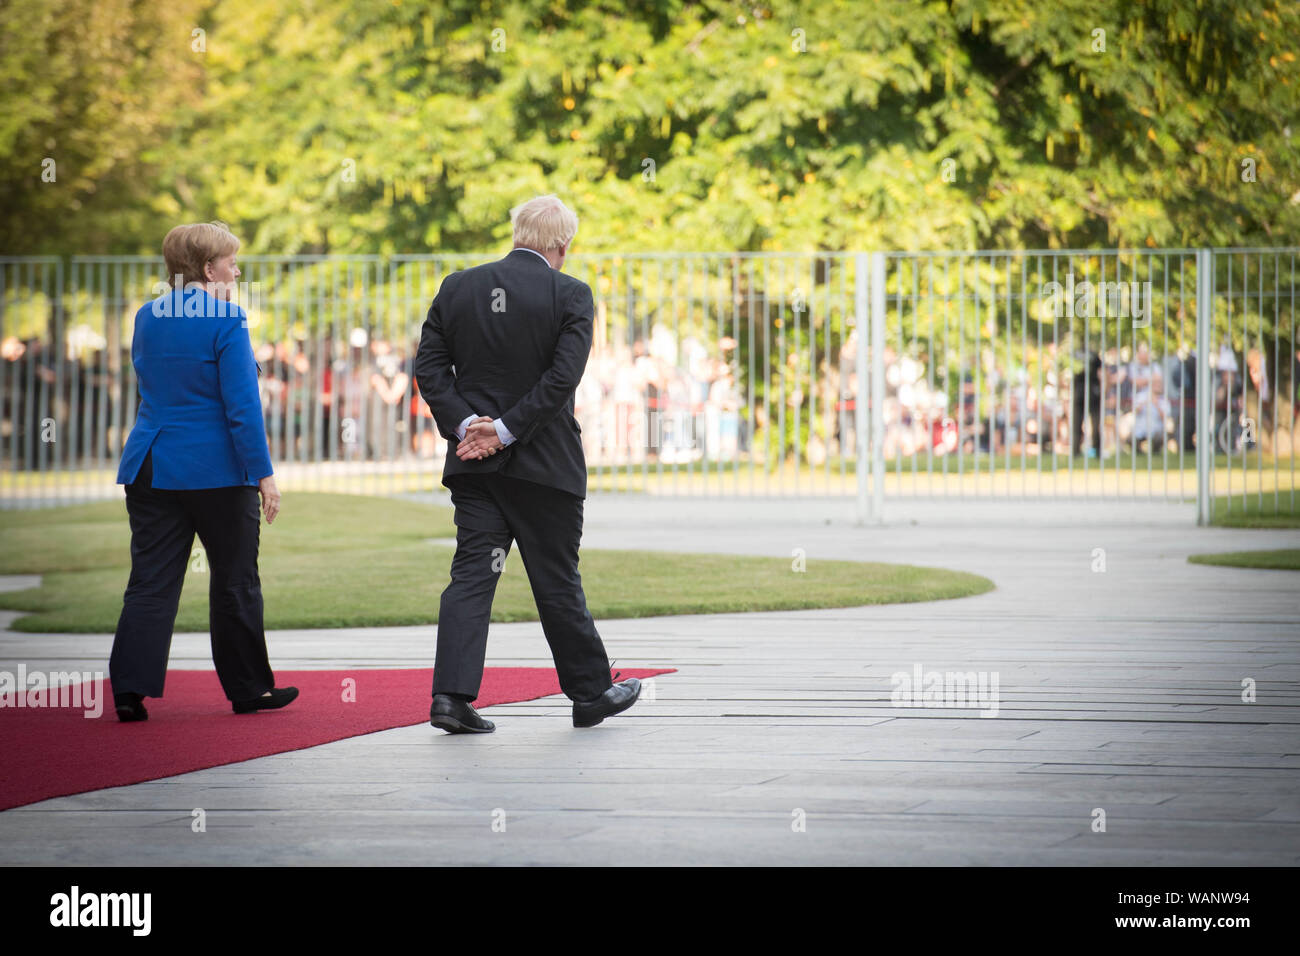 Prime Minister Boris Johnson walks with German Chancellor Angela Merkel in Berlin as he arrives ahead of talks to try to break the Brexit deadlock. Stock Photo